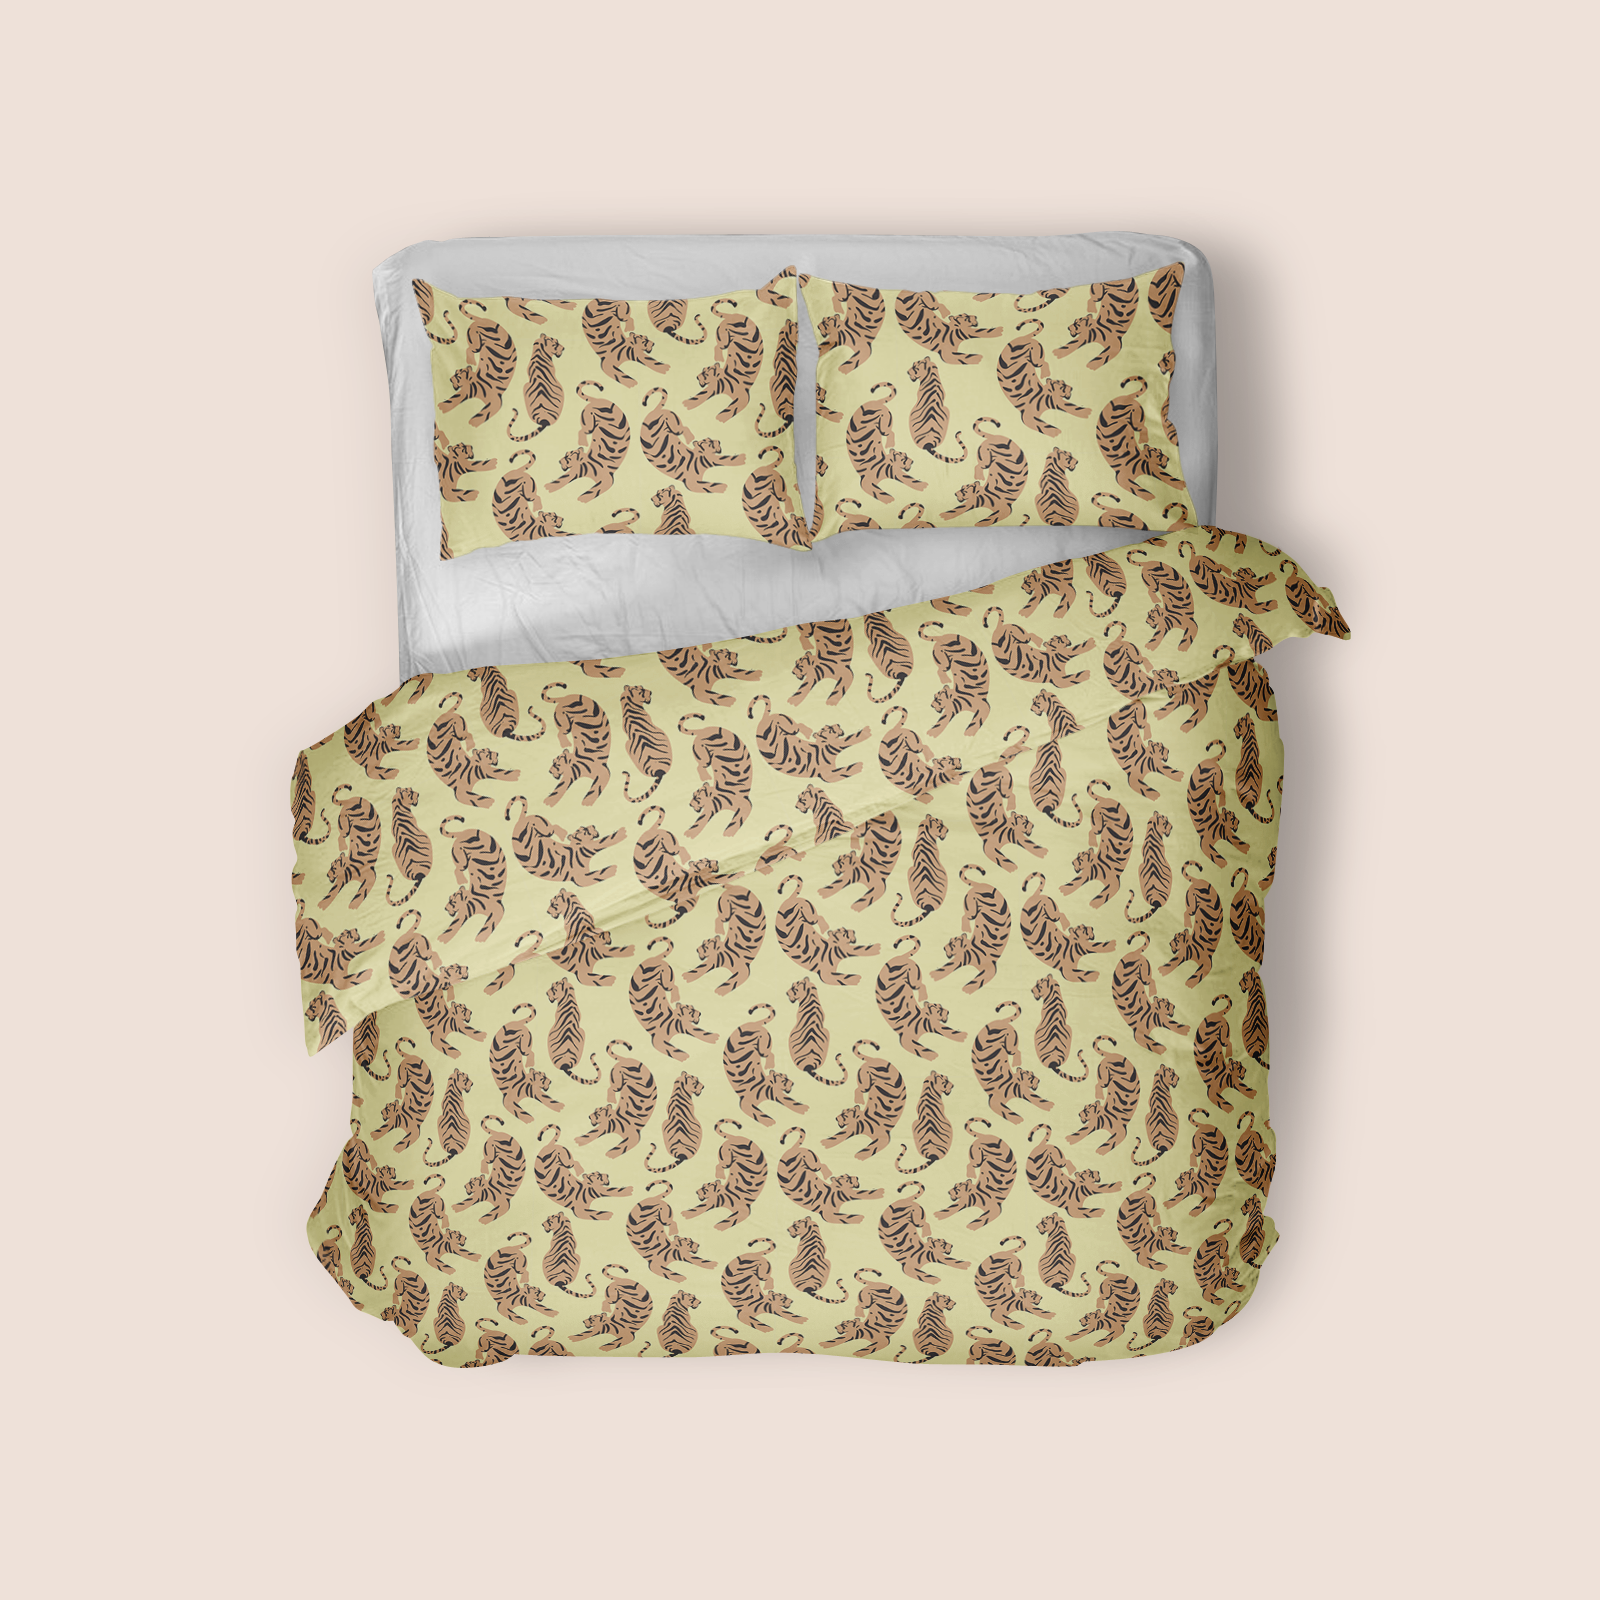 Tigers everywhere basic in yellow pattern design printed on recycled fabric home mockup